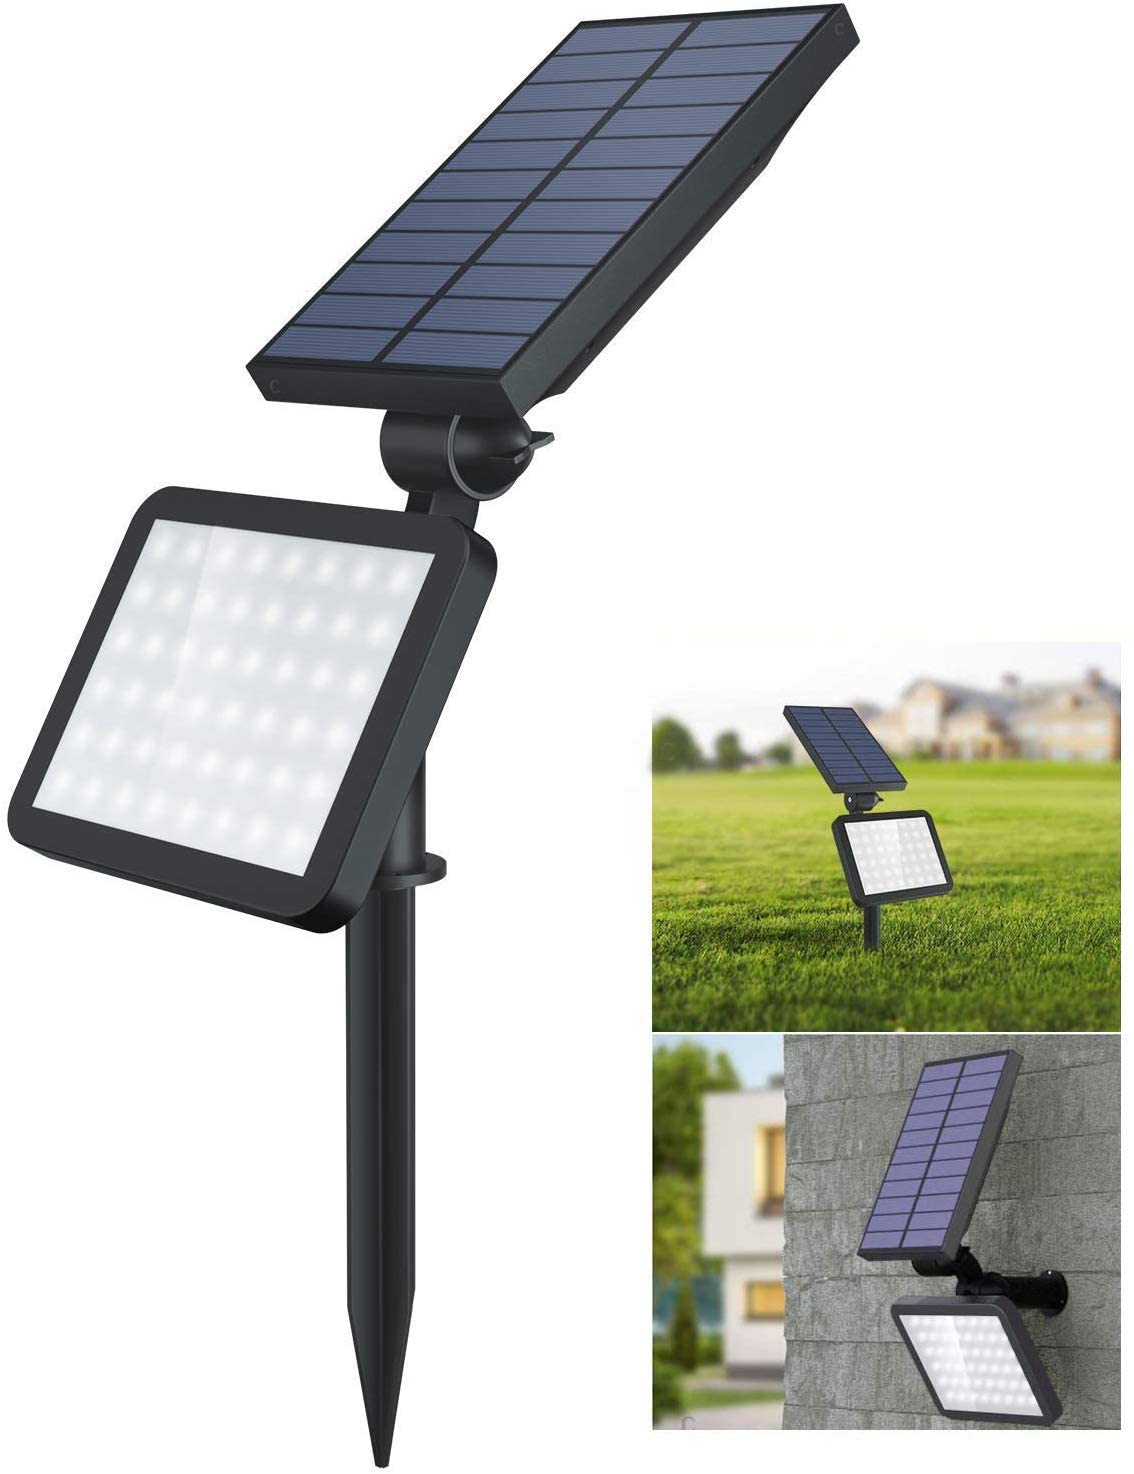 Coohole 48 LED Outdoor Solar Lights Spotlight Landscape Lighting Waterproof Wall Light for Night Security and Lawn Lamp Bright